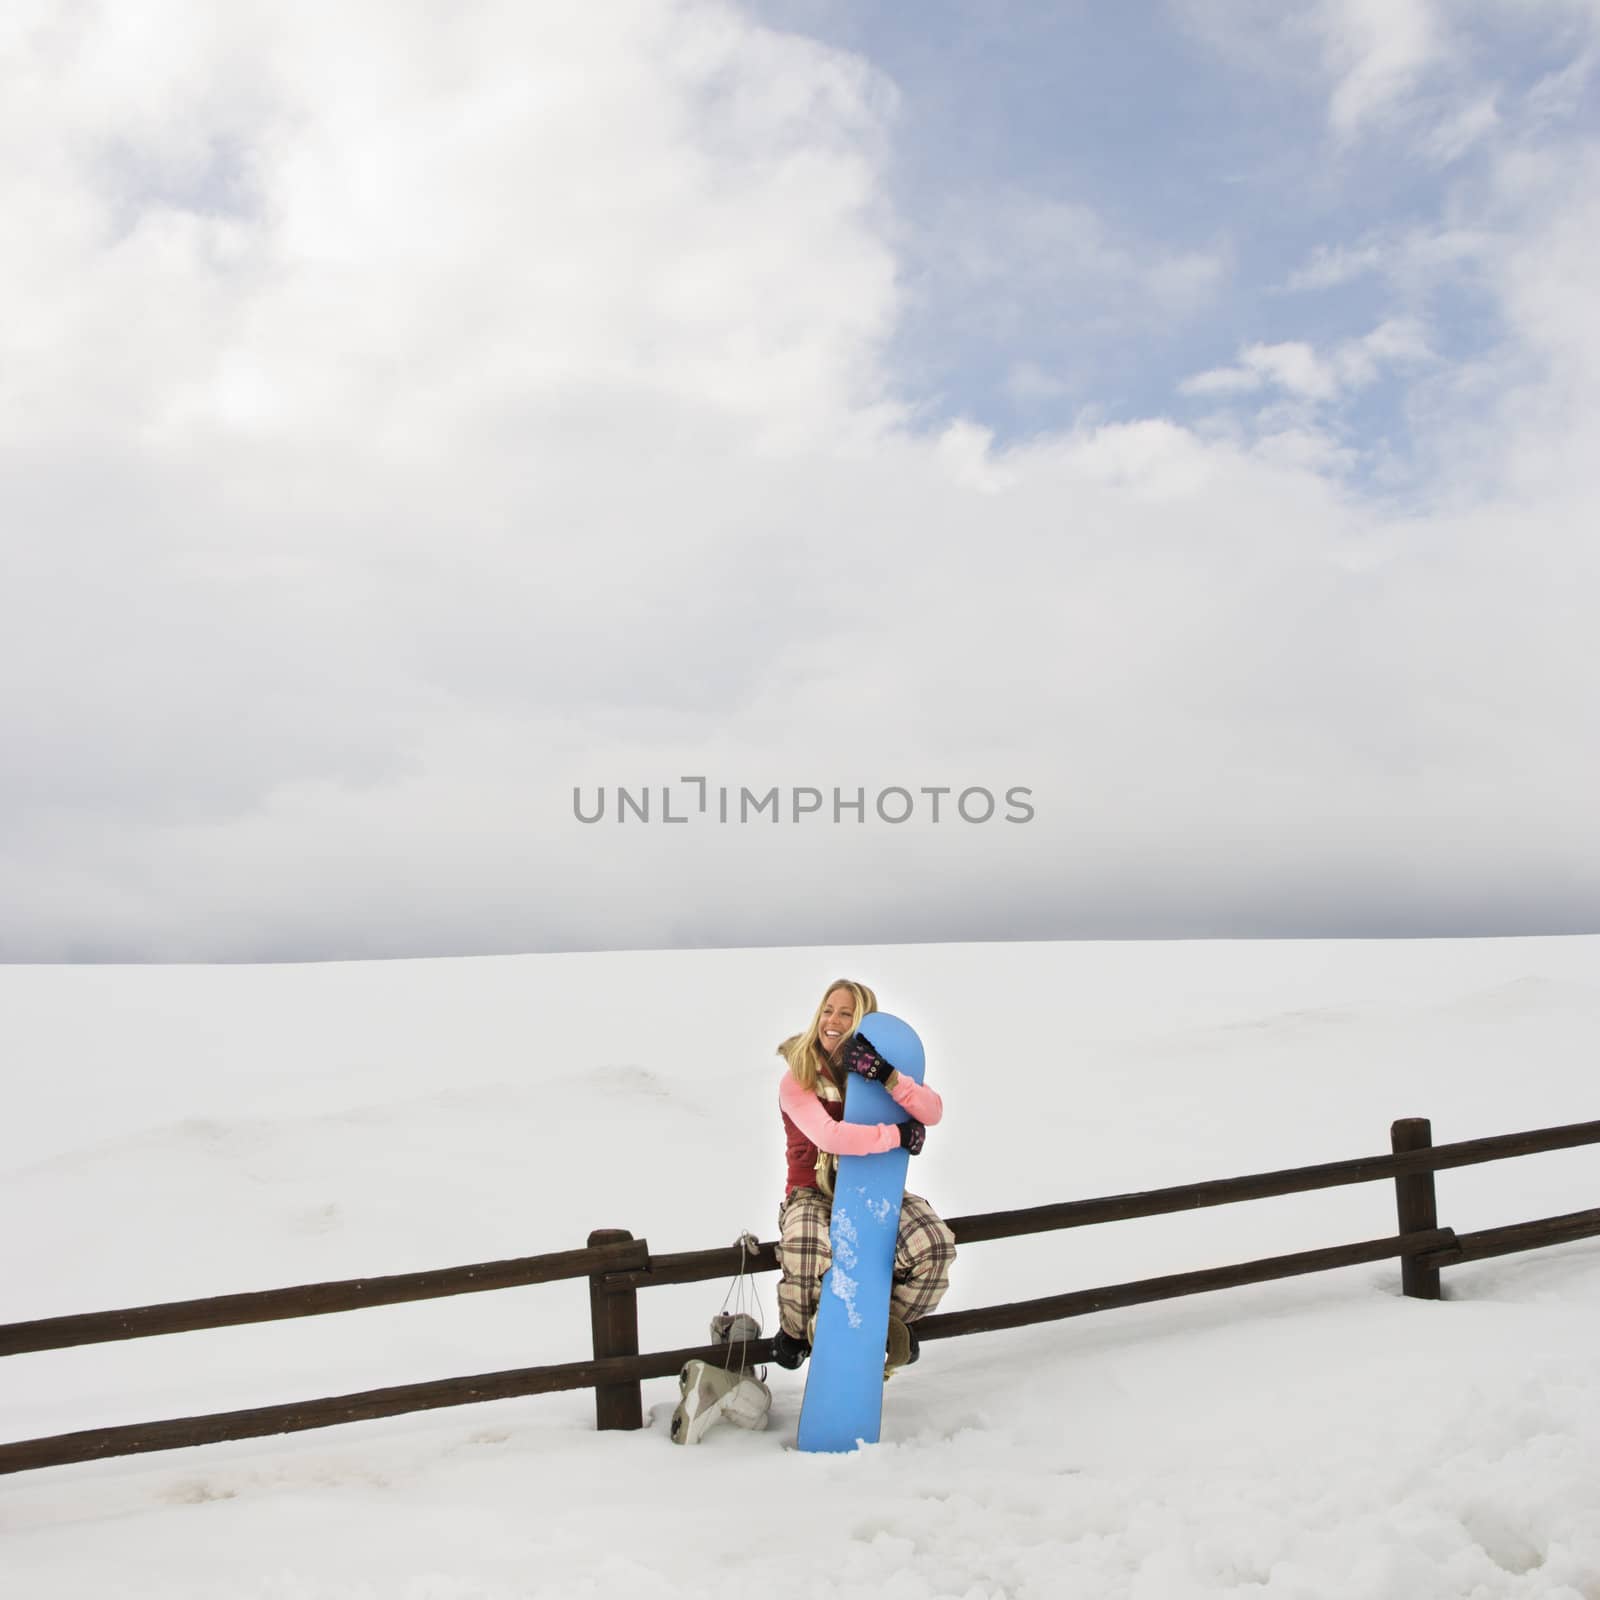 Young woman in winter clothes sitting on fence in snowy field holding snowboard.